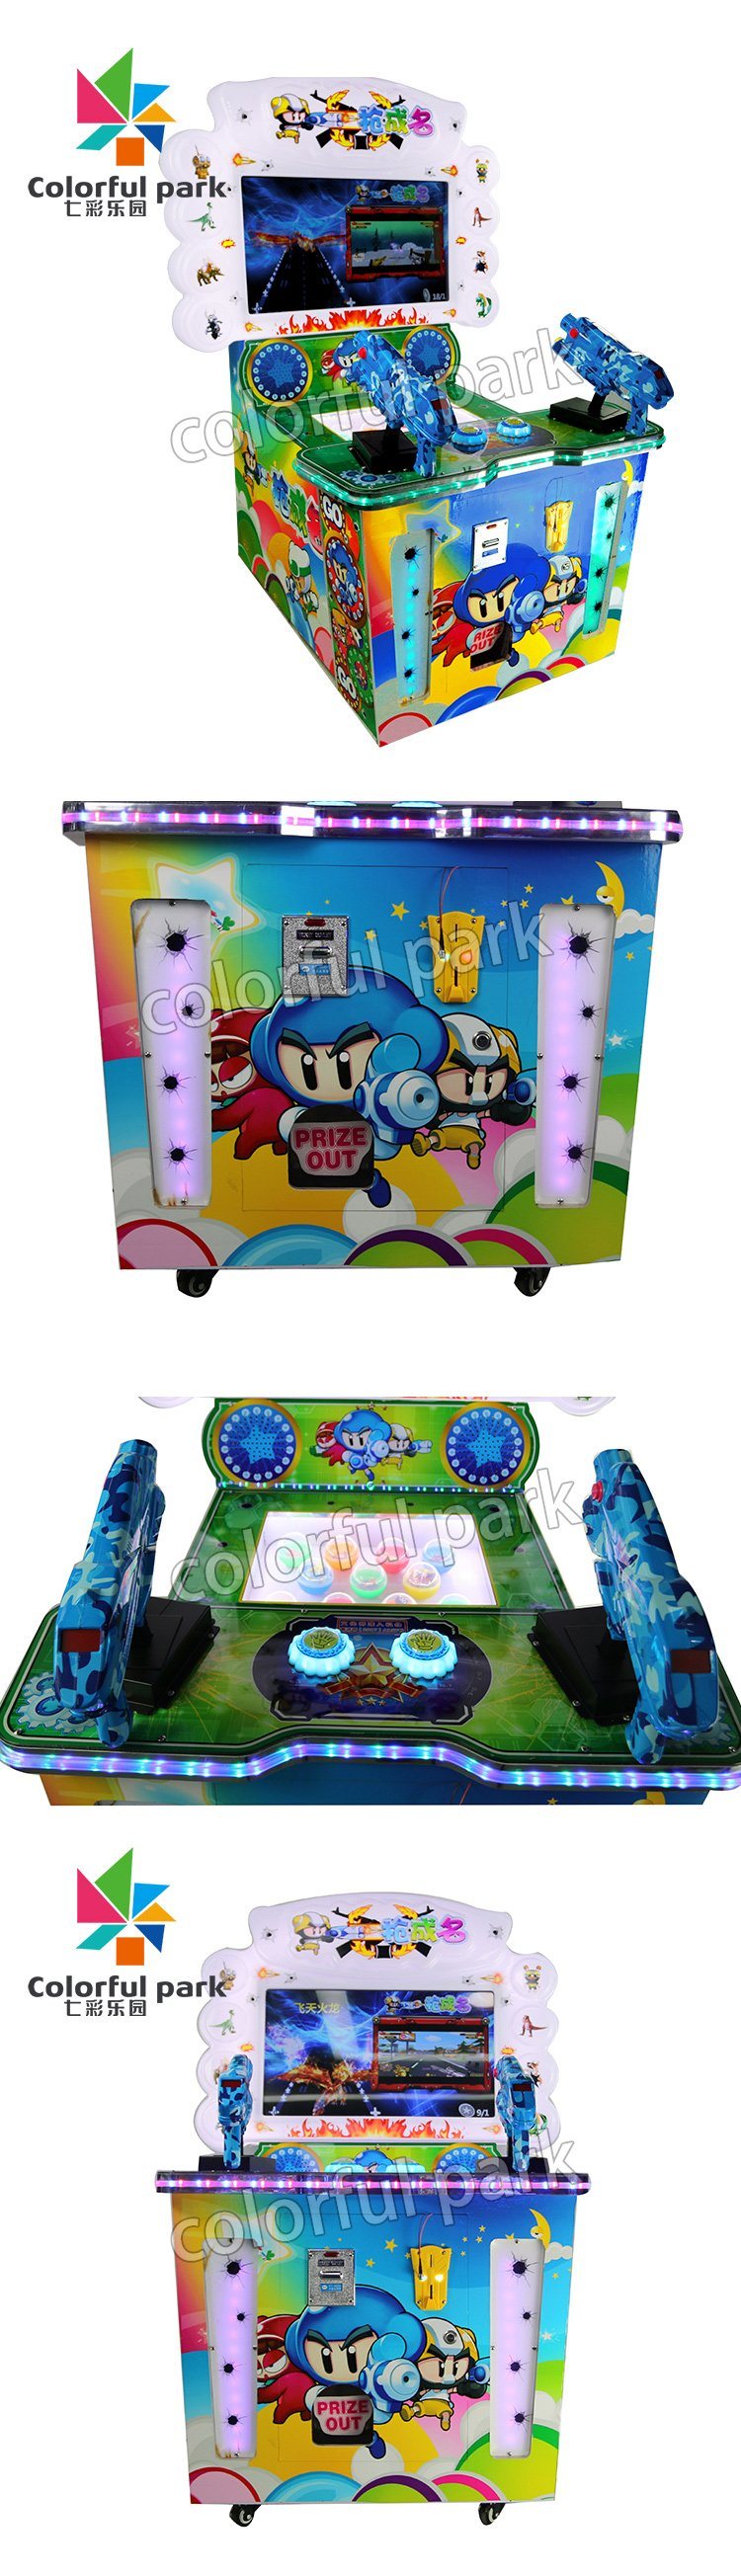 Colorful Park Shooting Arcade Game Machine Water Shooting Arcade Game Machine